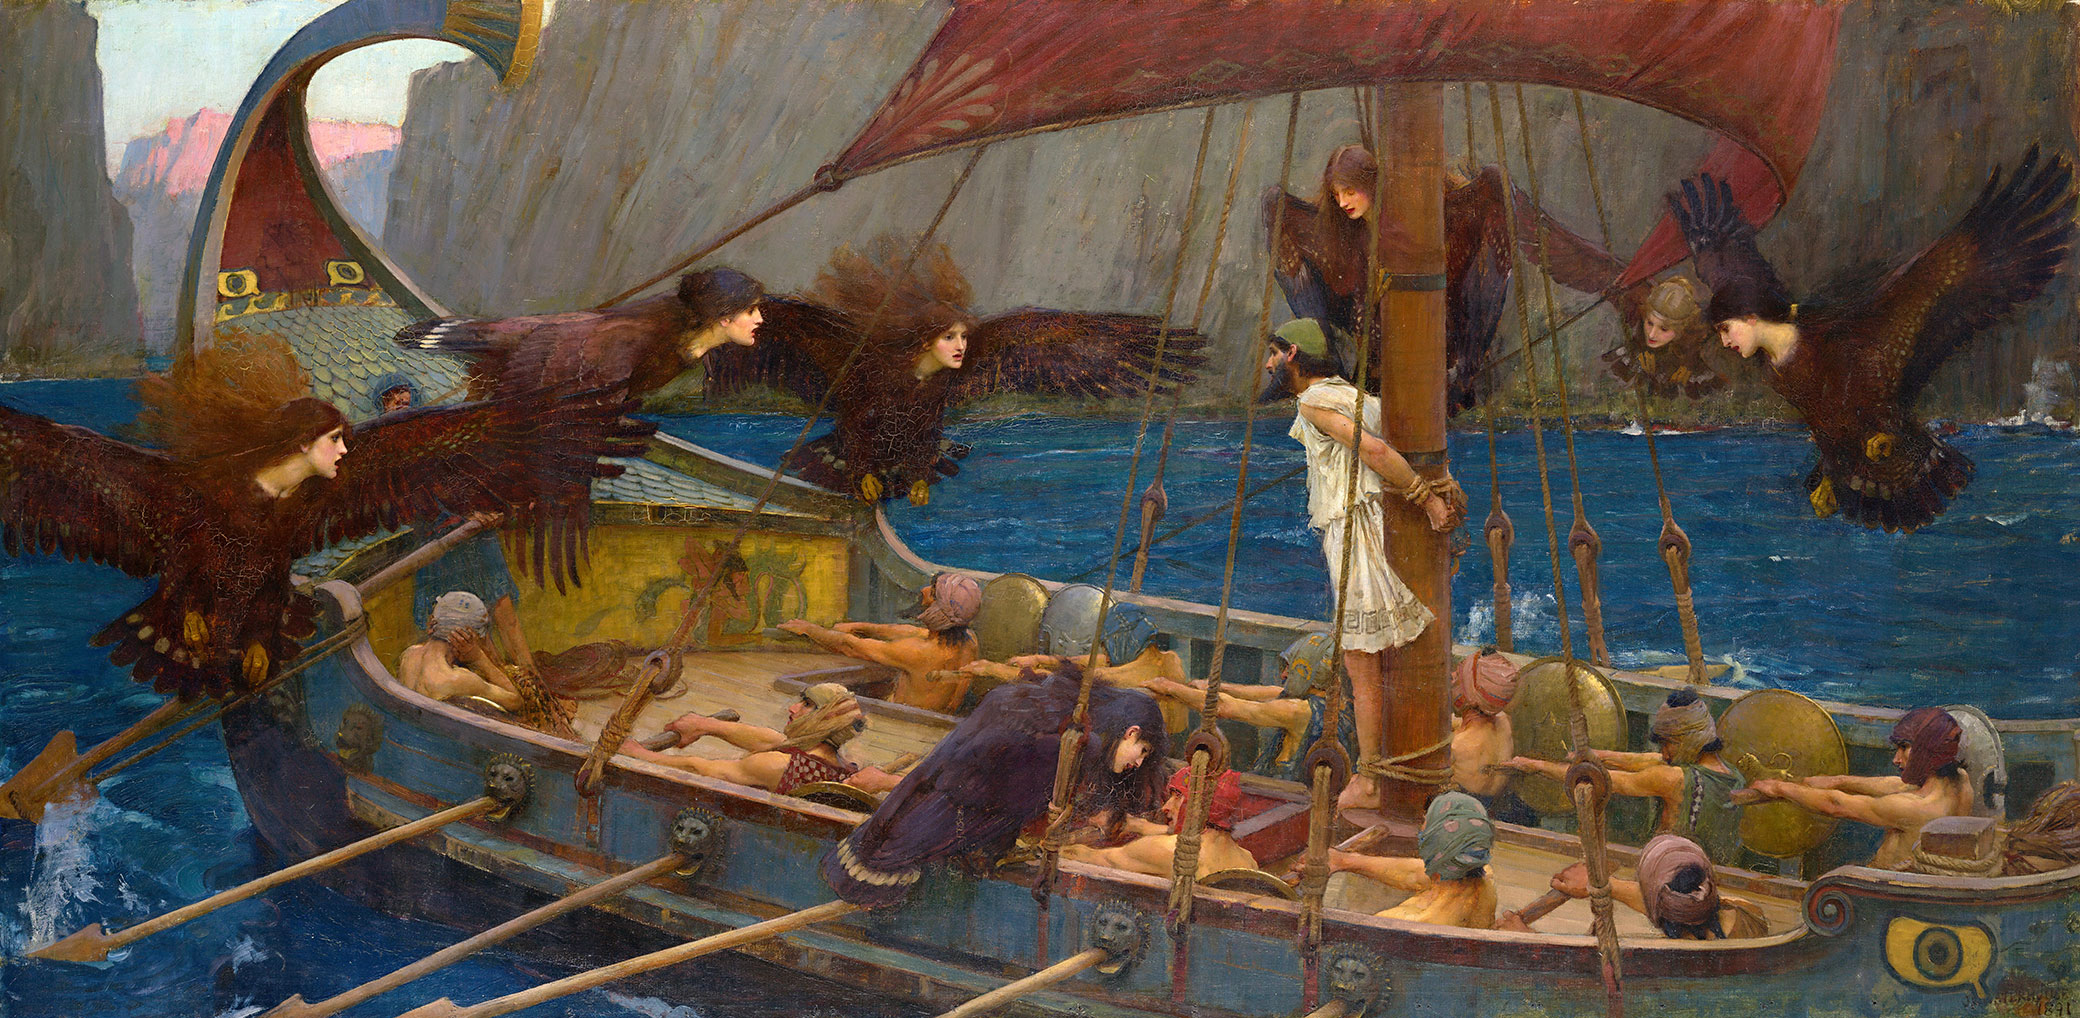 A painting depicting Odysseus tied to the mast of his ship while he listens to the song of the sirens. His crew rows the ship.